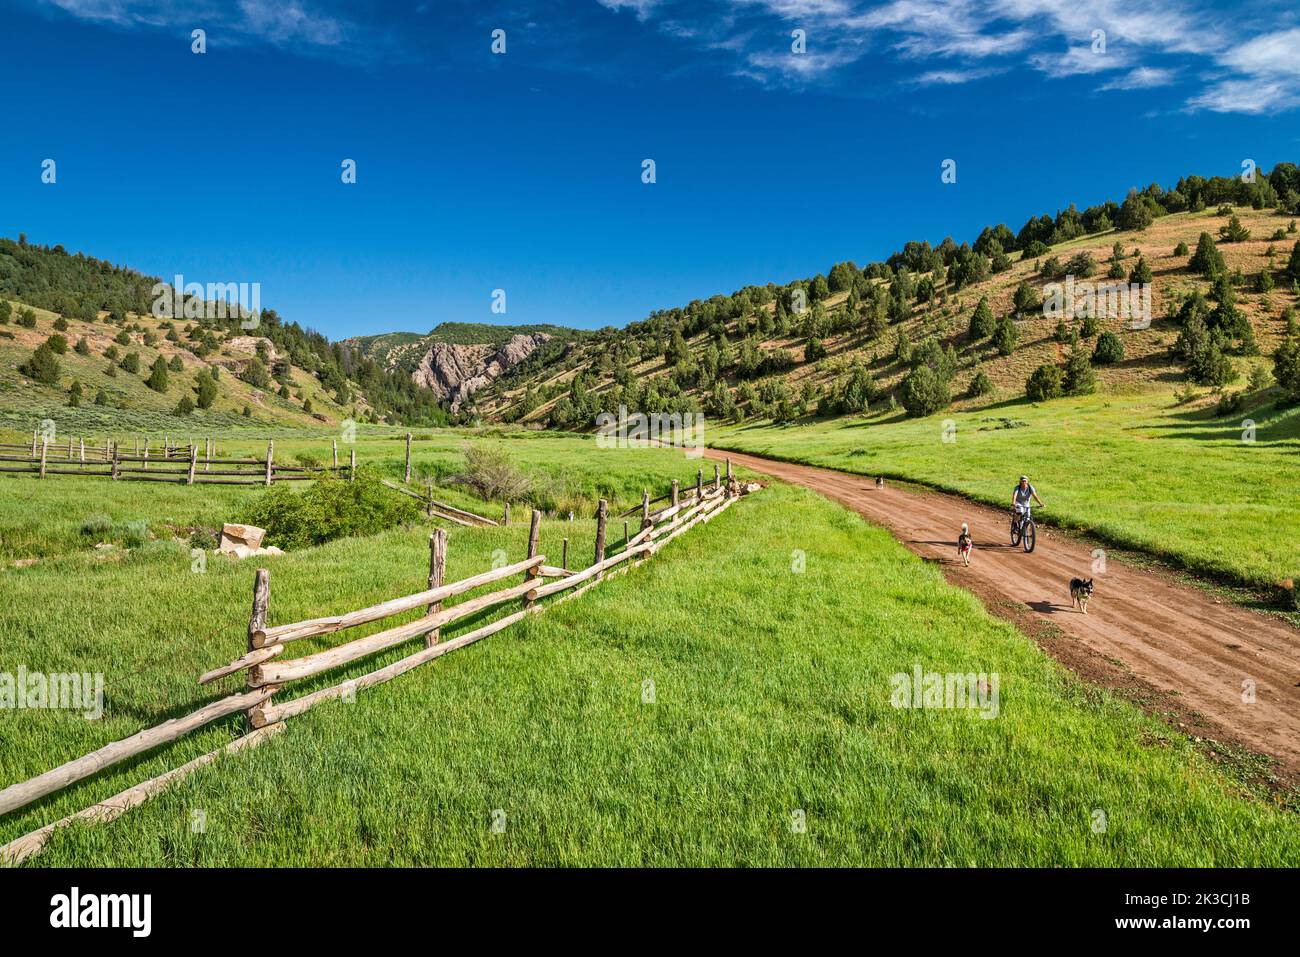 Young woman biking with her three dogs, Rees Valley, Chicken Creek Road, FR 101, San Pitch Mountains, Uinta National Forest, Utah, USA Stock Photo